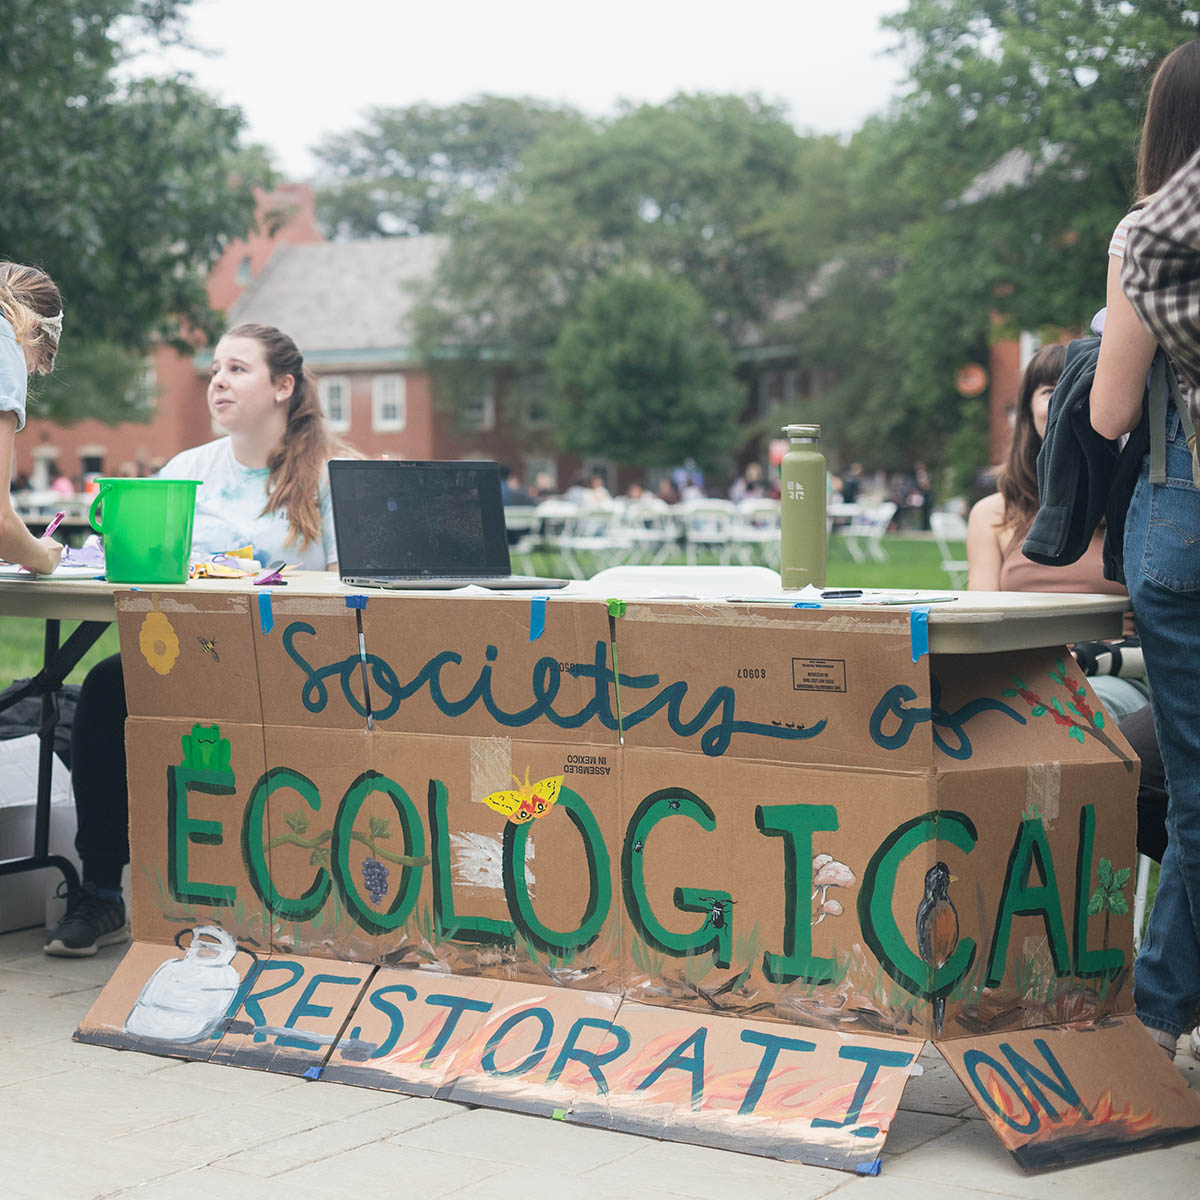 Photo of the Society Ecological Restoration Society's table at the student activity fair